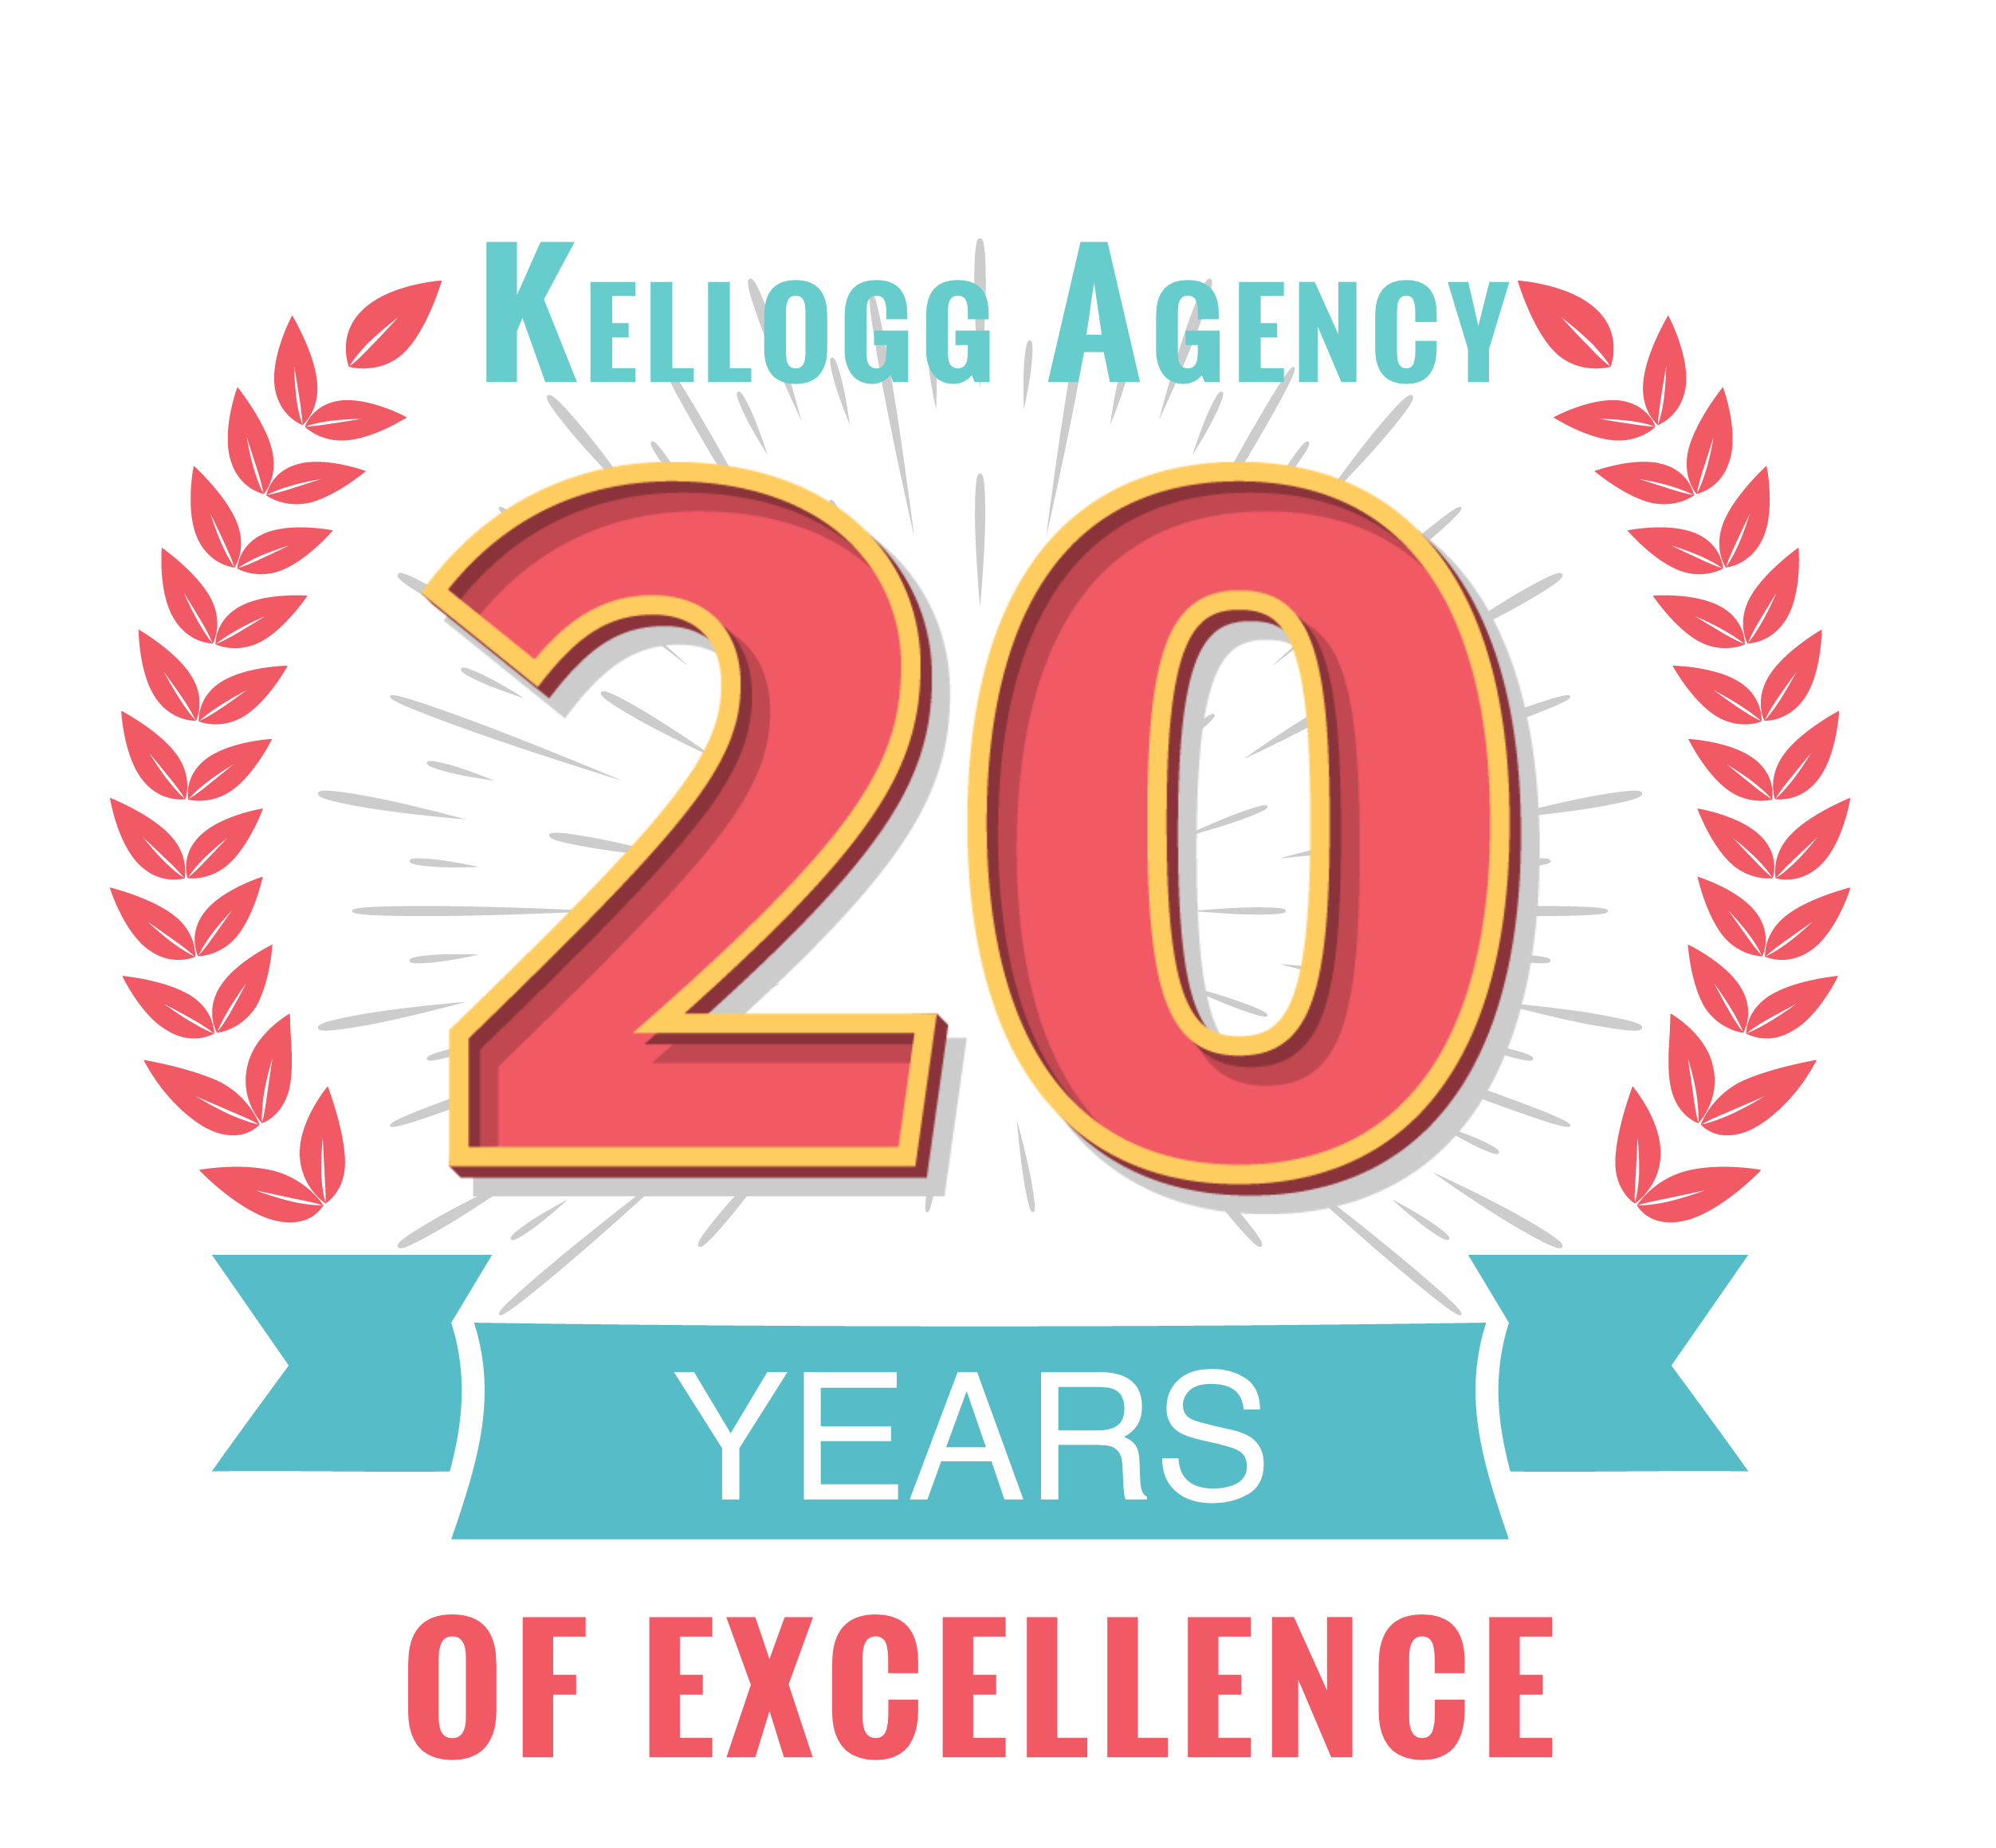 Kellogg Agency 20 Years of Excellence logo